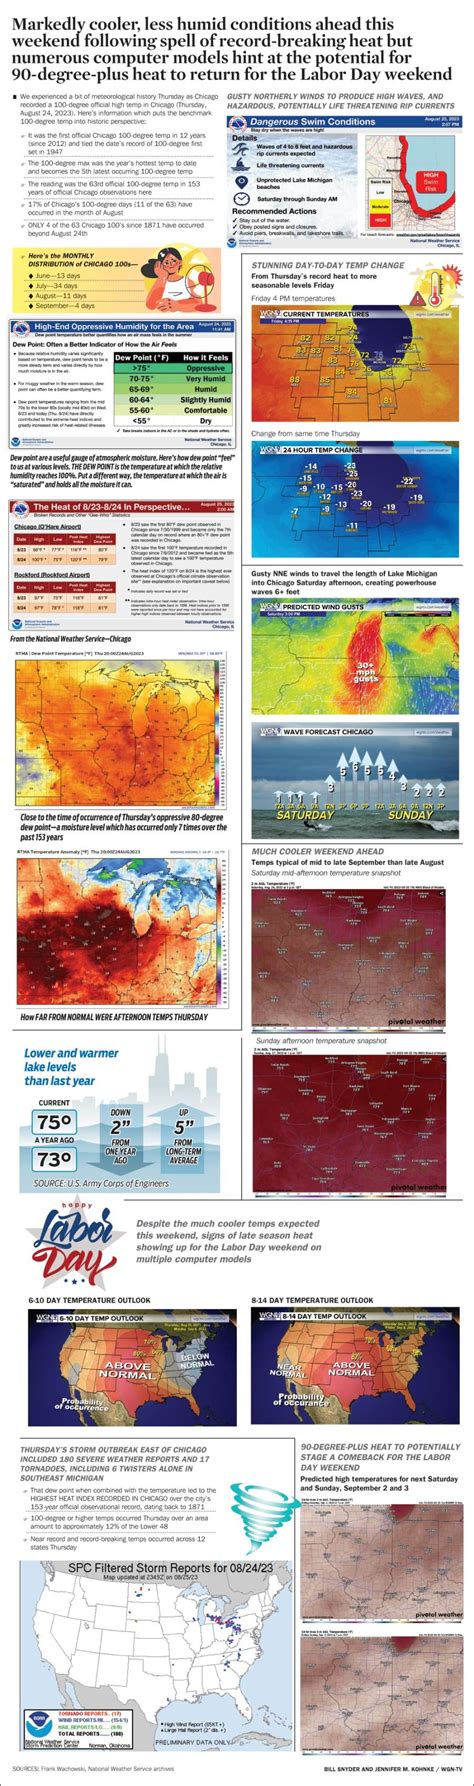 Markedly cooler, less humid conditions ahead this weekend following spell of record-breaking heat but numerous computer models hint at the potential for 90-degree-plus heat to return for the Labor Day weekend